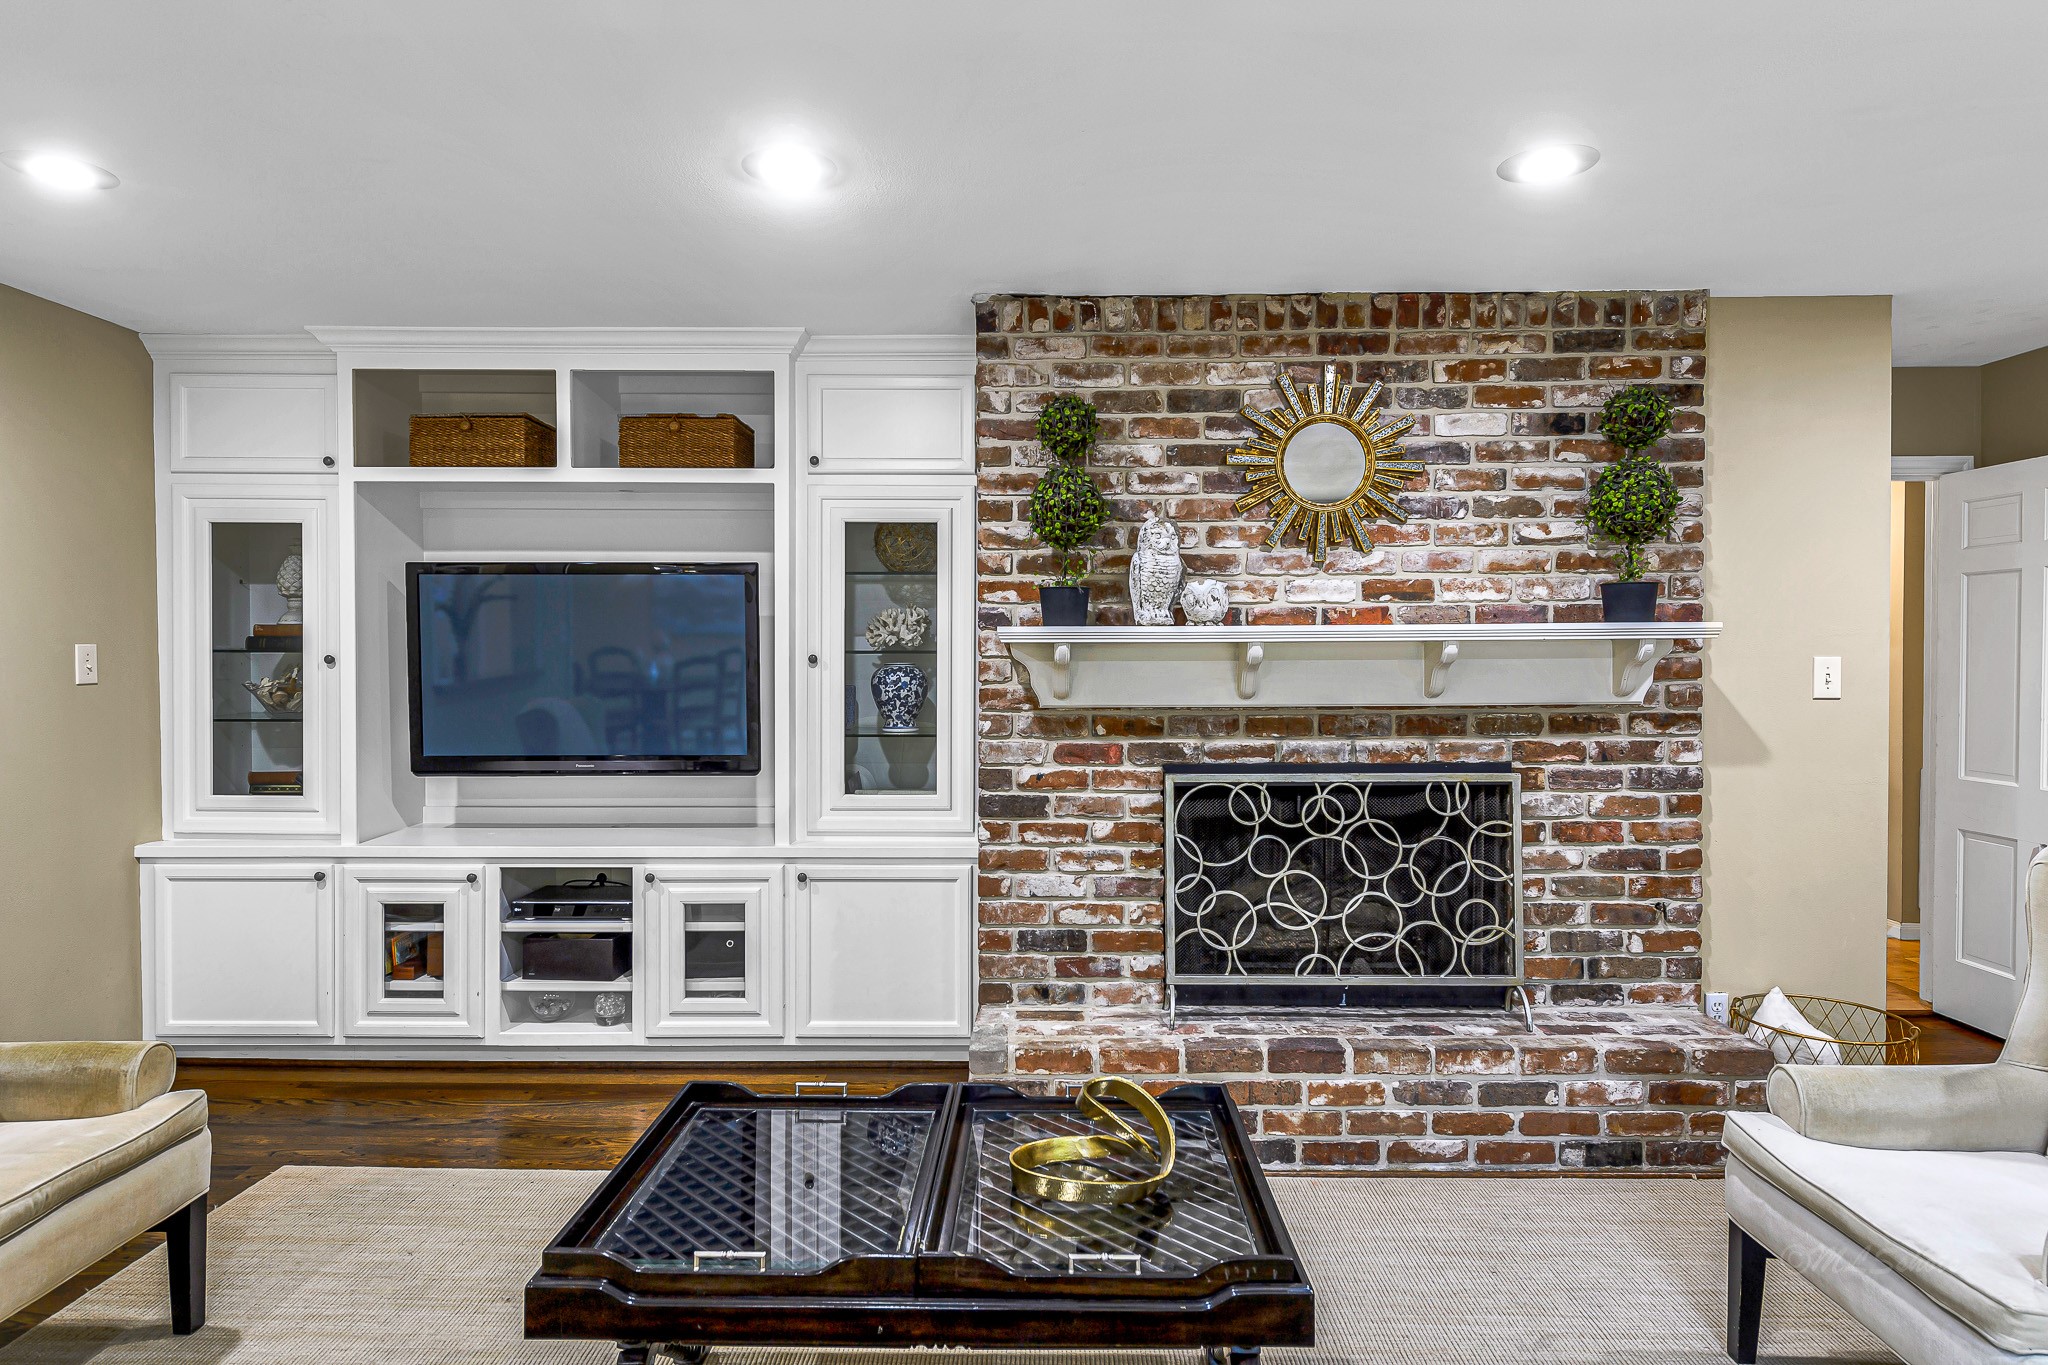 The centerpiece of the room is a gas log brick fireplace that bathes the space in a soft, warm glow.